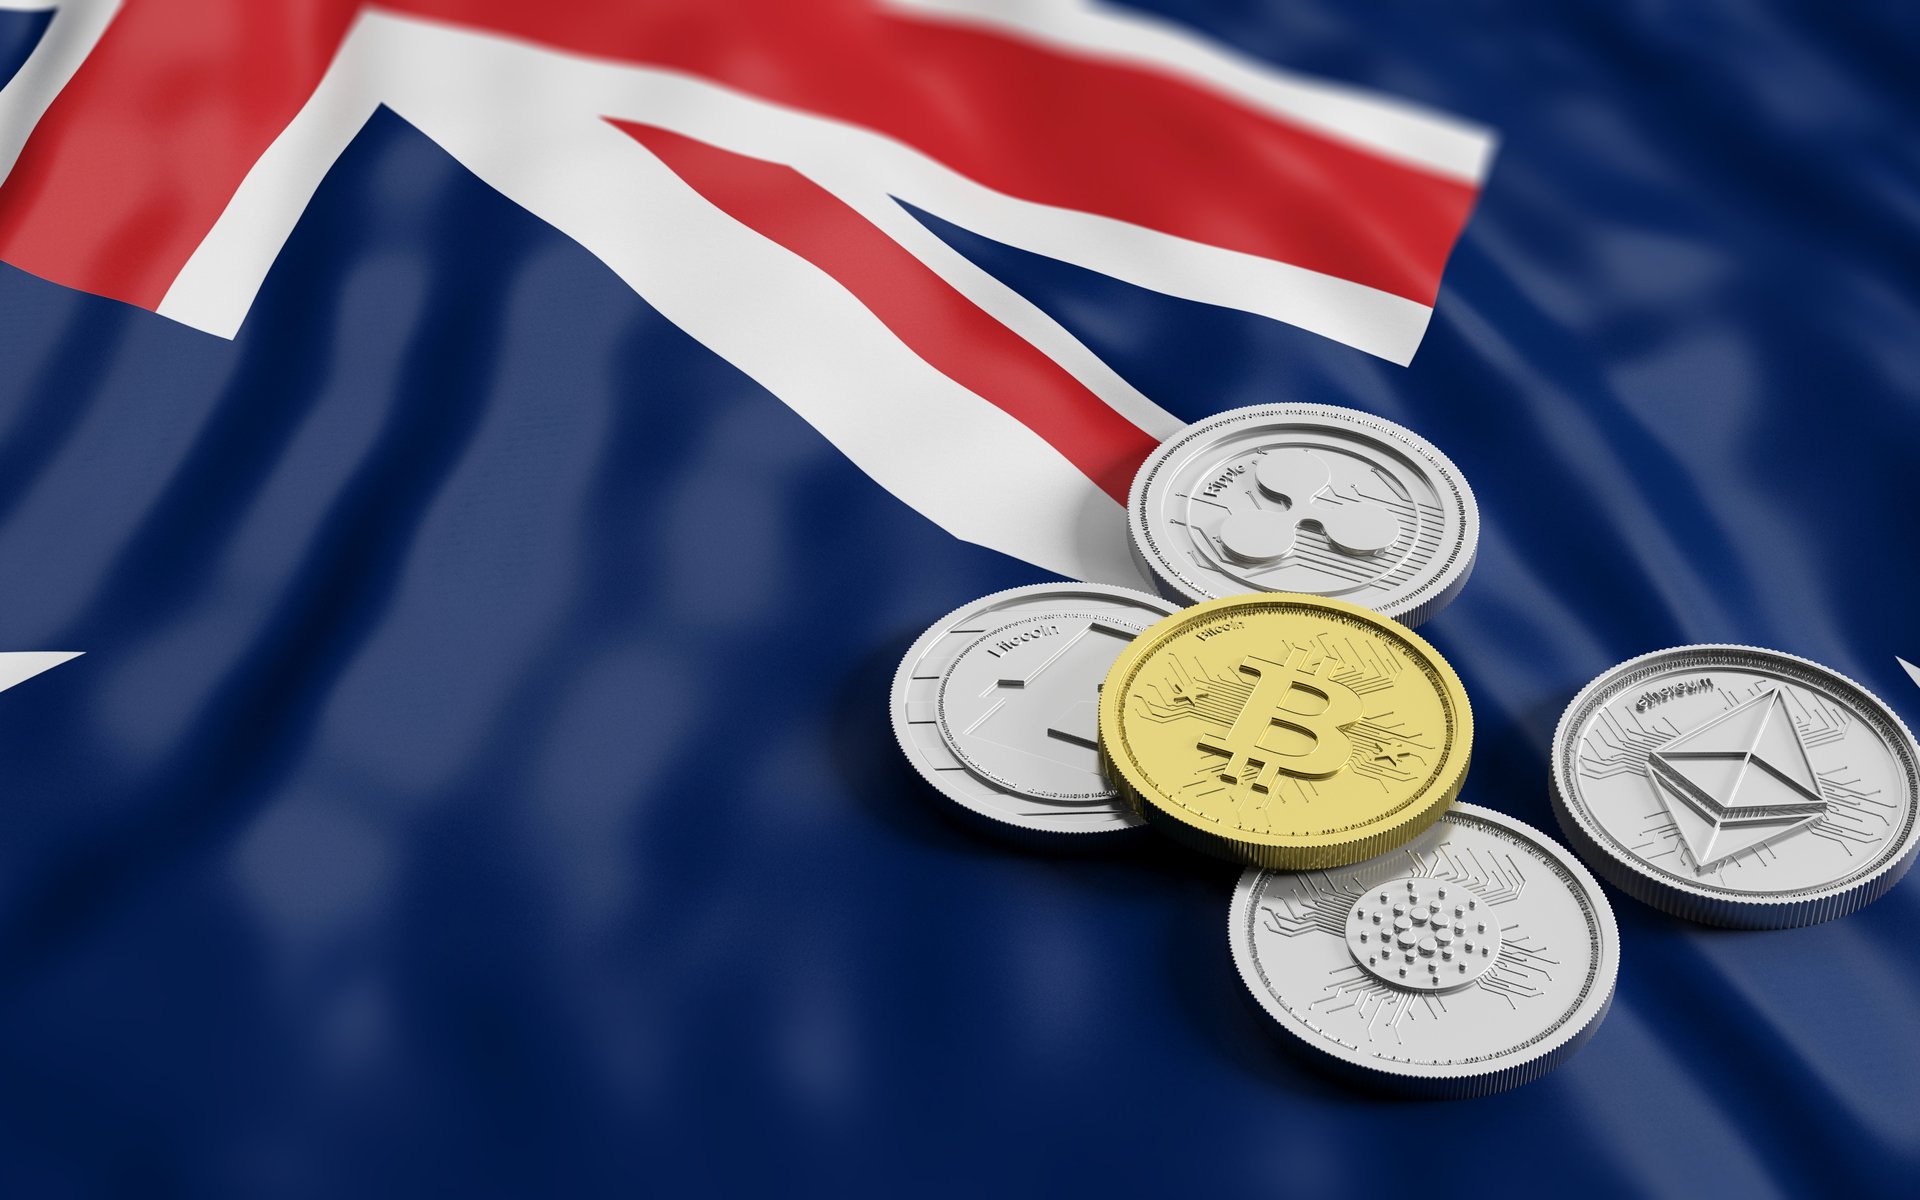 is cryptocurrency legal in australia